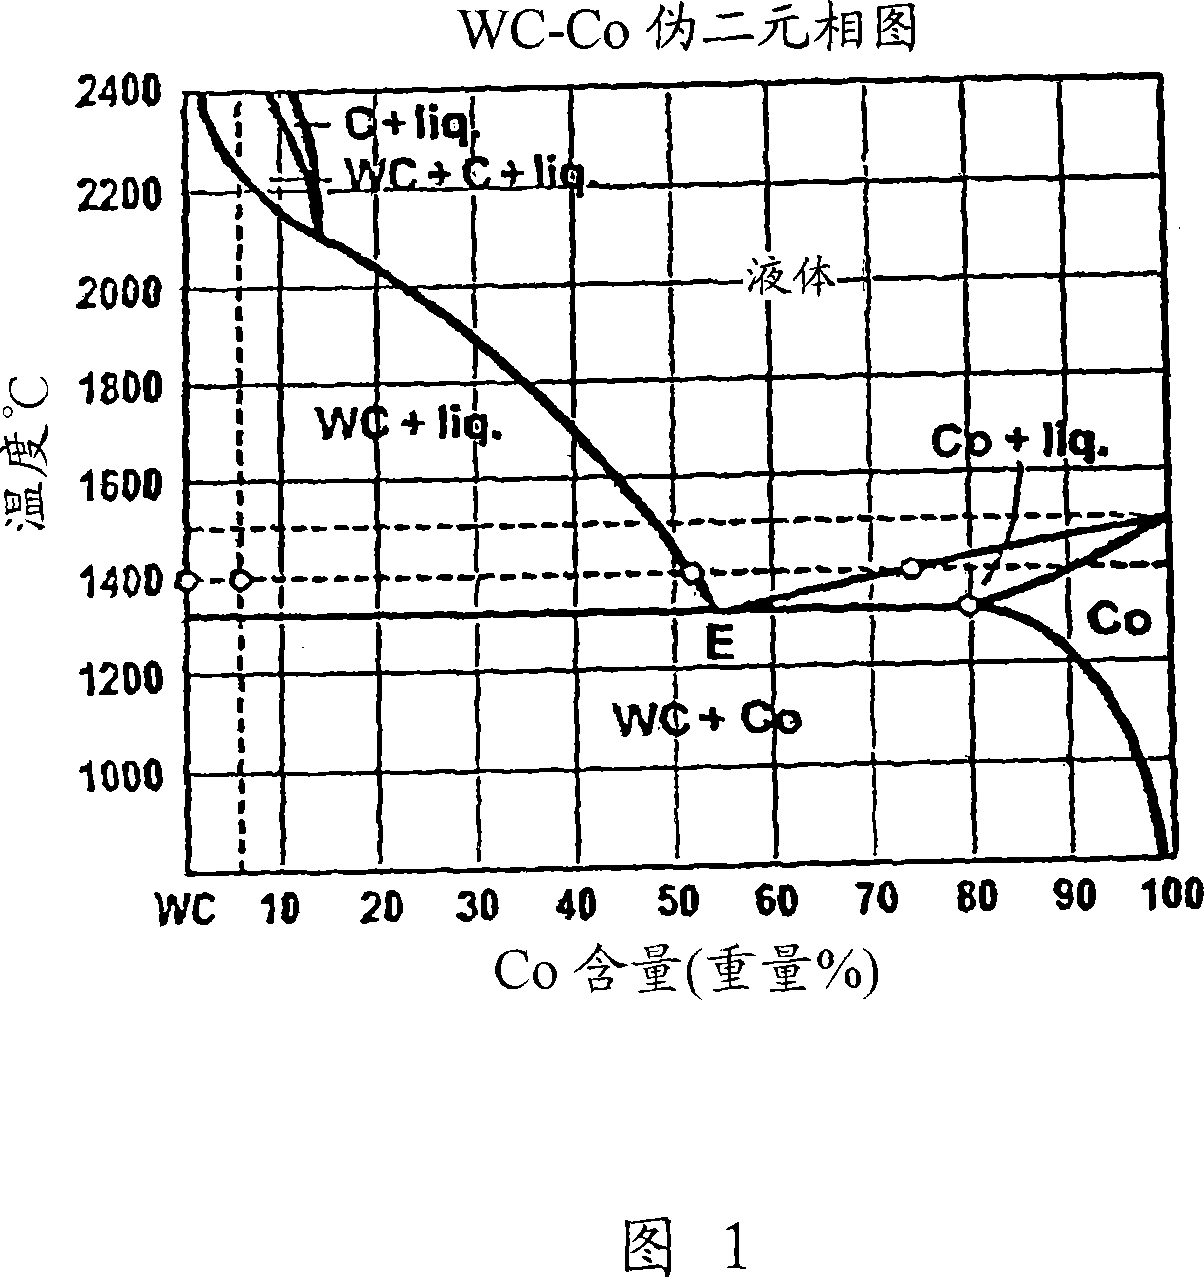 Method for consolidating tough coated hard powders